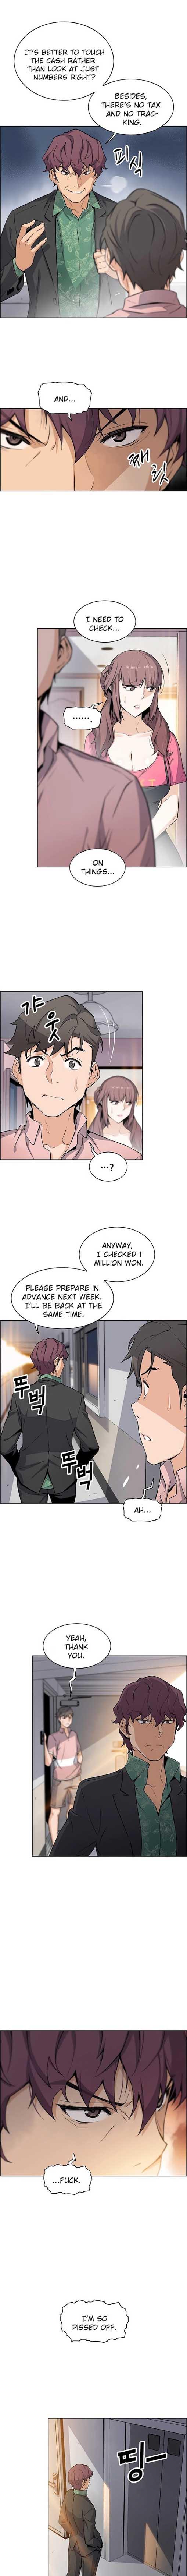 Housekeeper [Neck Pillow, Paper] Ch.49/49 [English] [Manhwa PDF] Completed 279